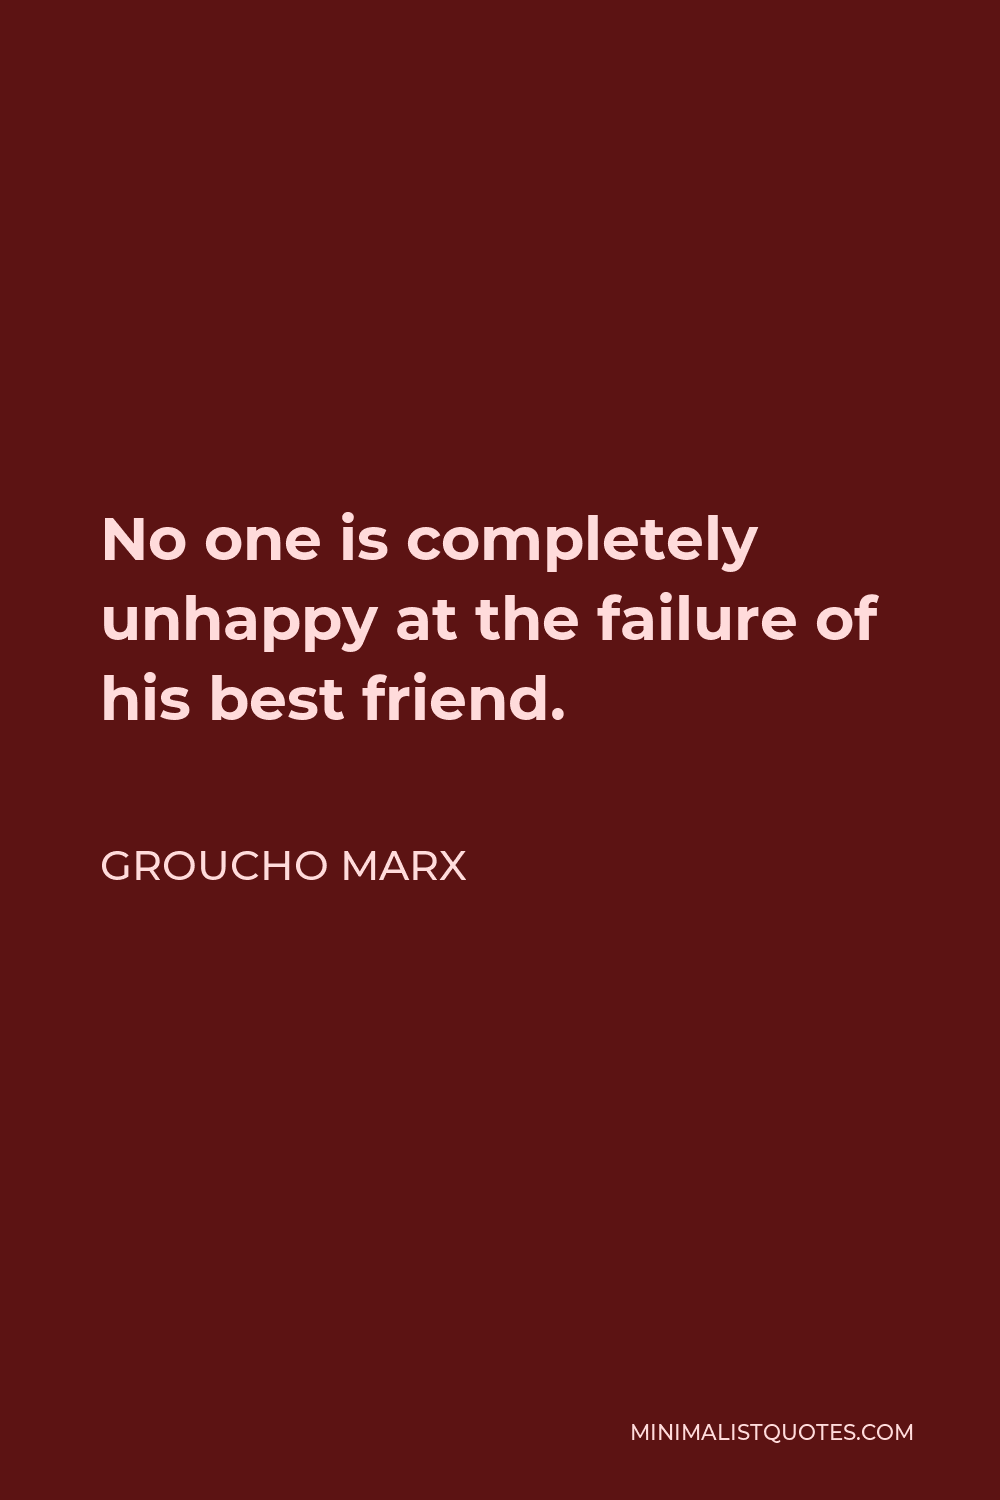 Groucho Marx Quote - No one is completely unhappy at the failure of his best friend.